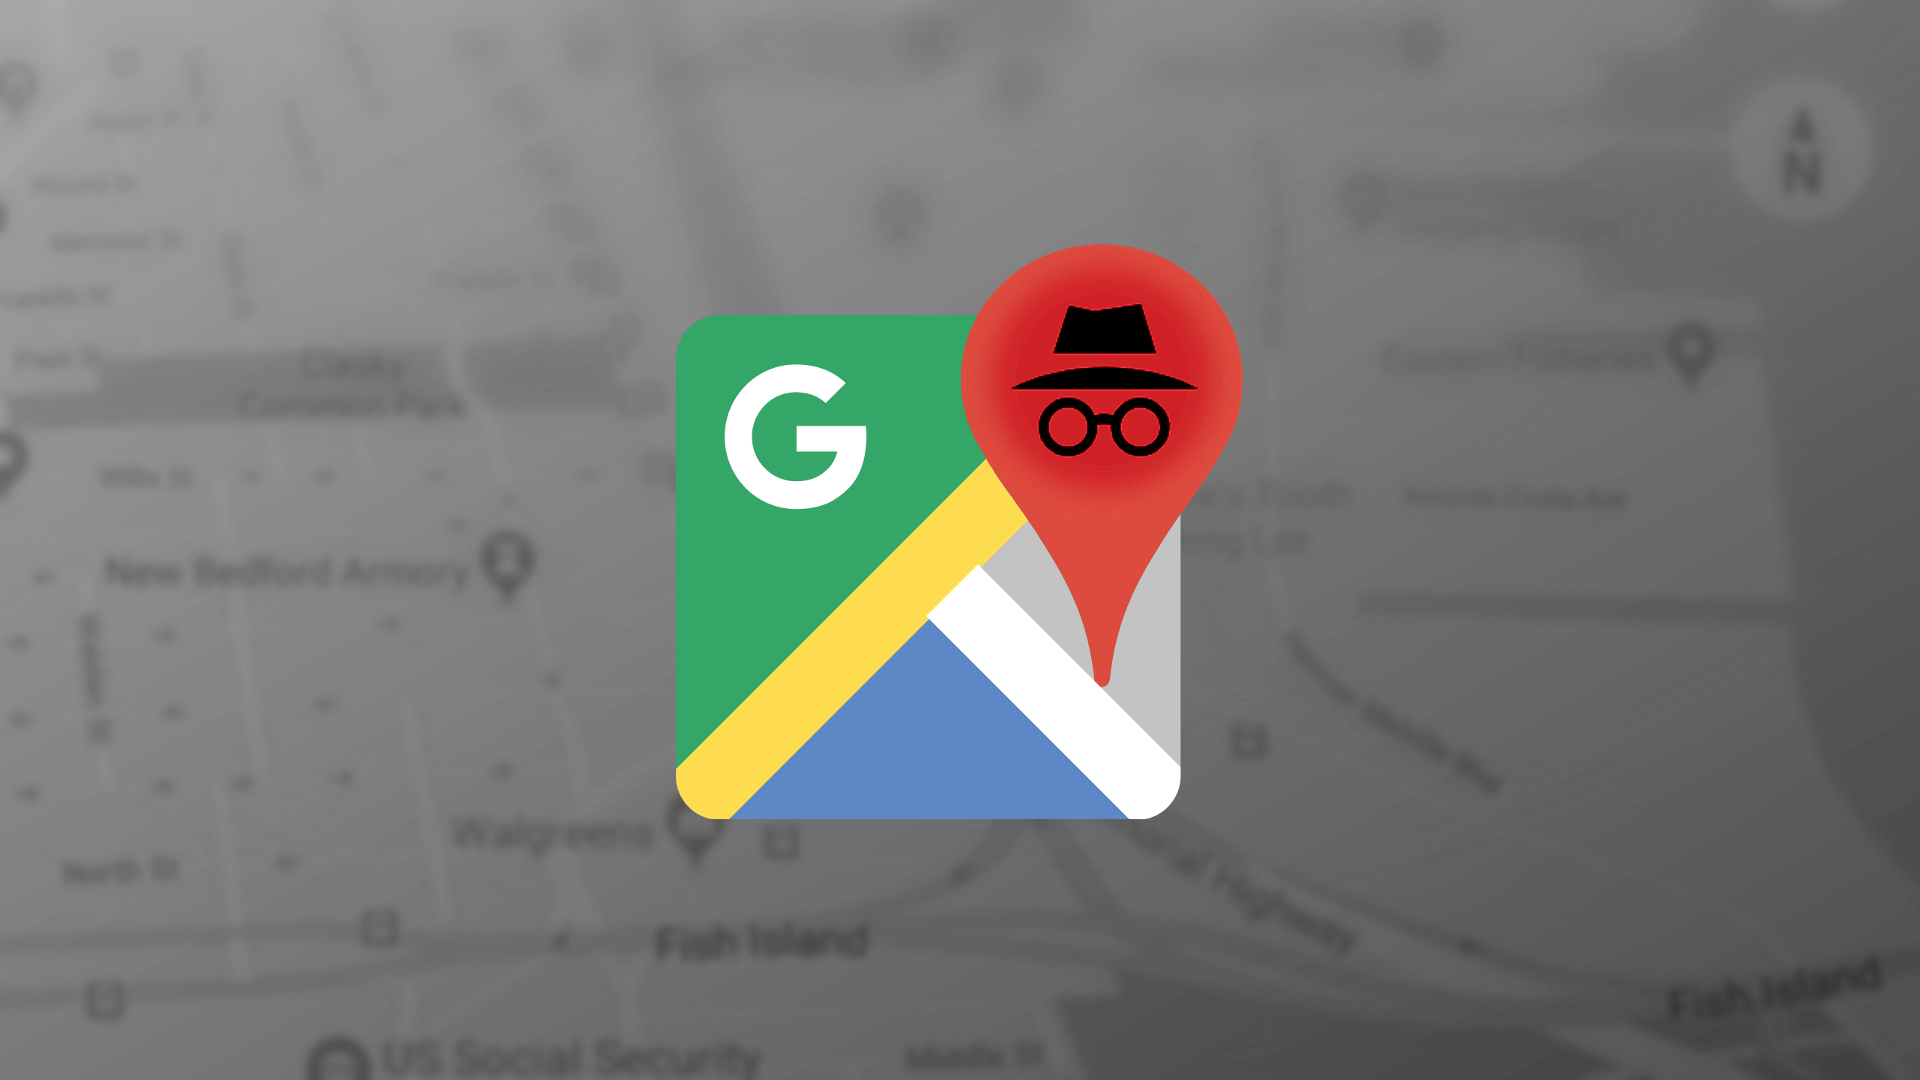 Incognito mode for Google Maps is rolling out for select users